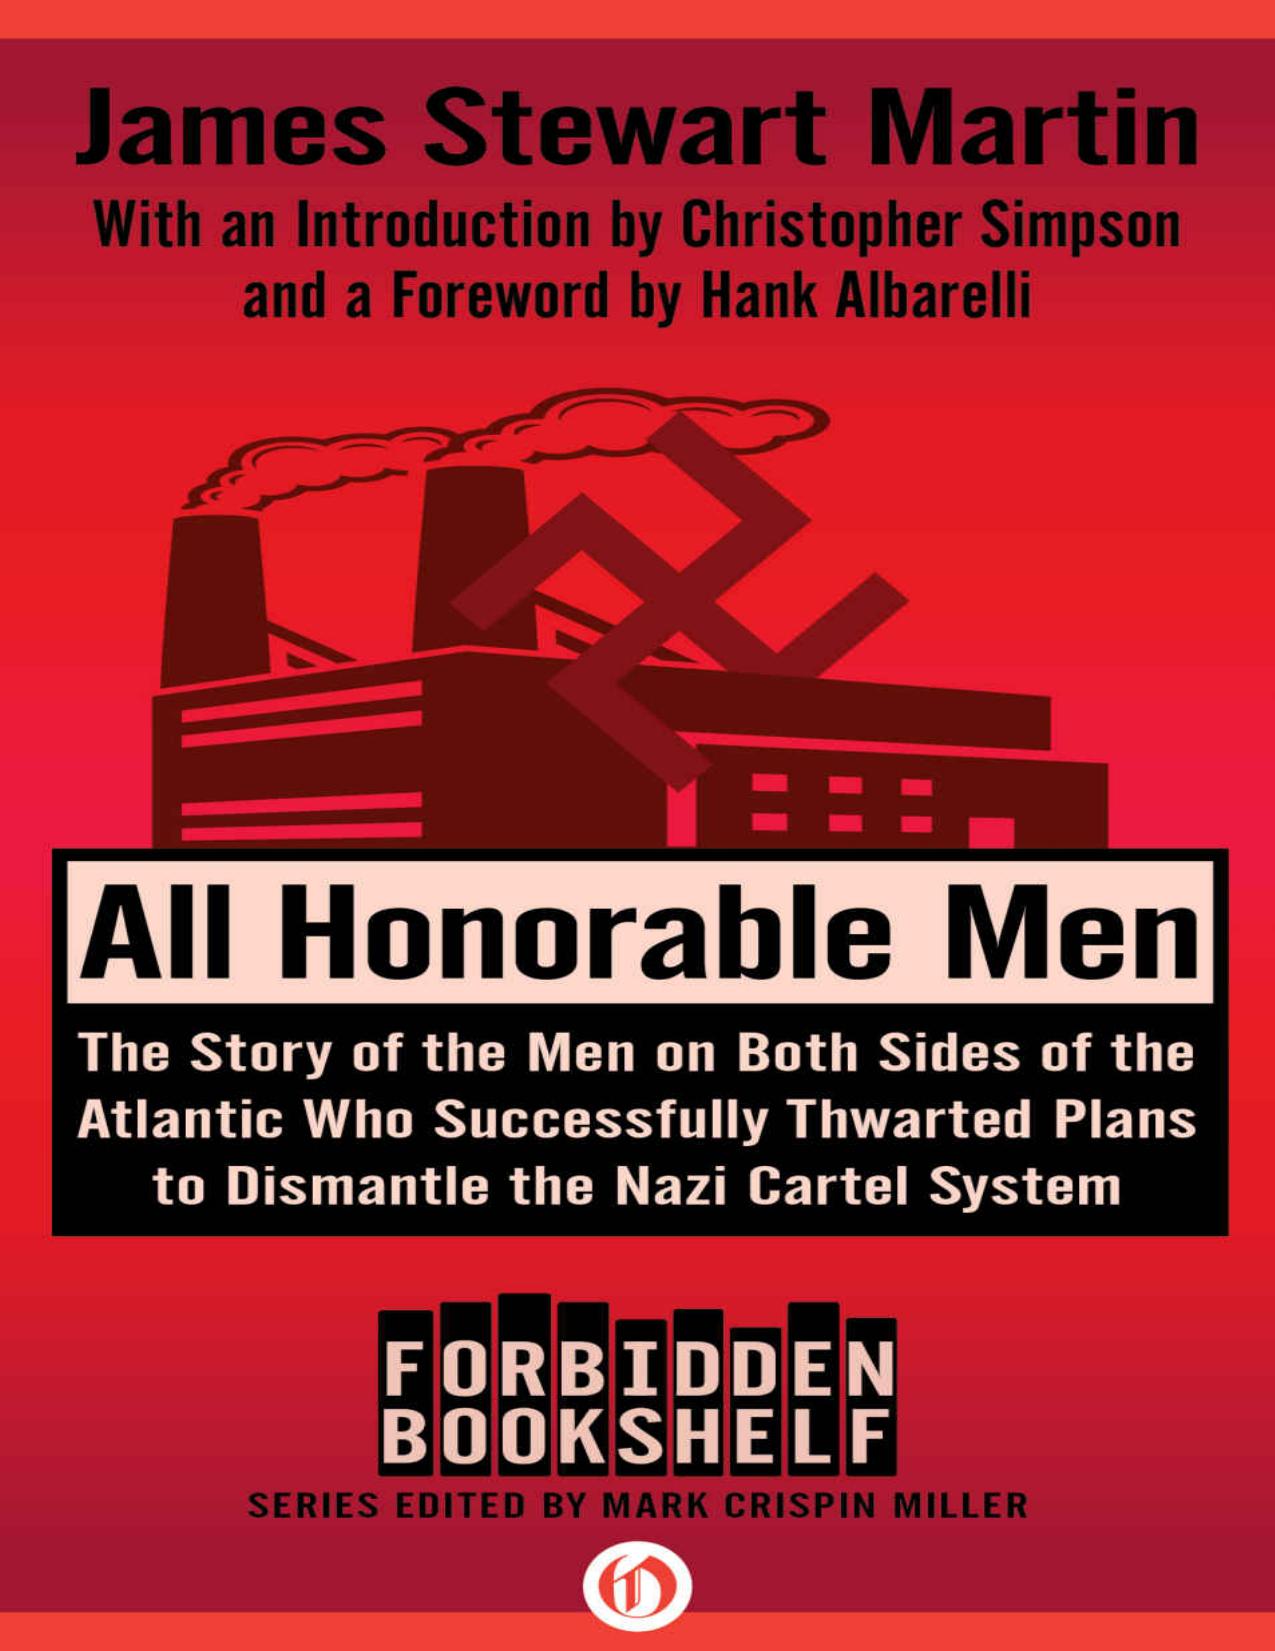 All Honorable Men: The Story of the Men on Both Sides of the Atlantic Who Successfully Thwarted Plans to Dismantle the Nazi Cartel System (Forbidden Bookshelf) by James Stewart Martin